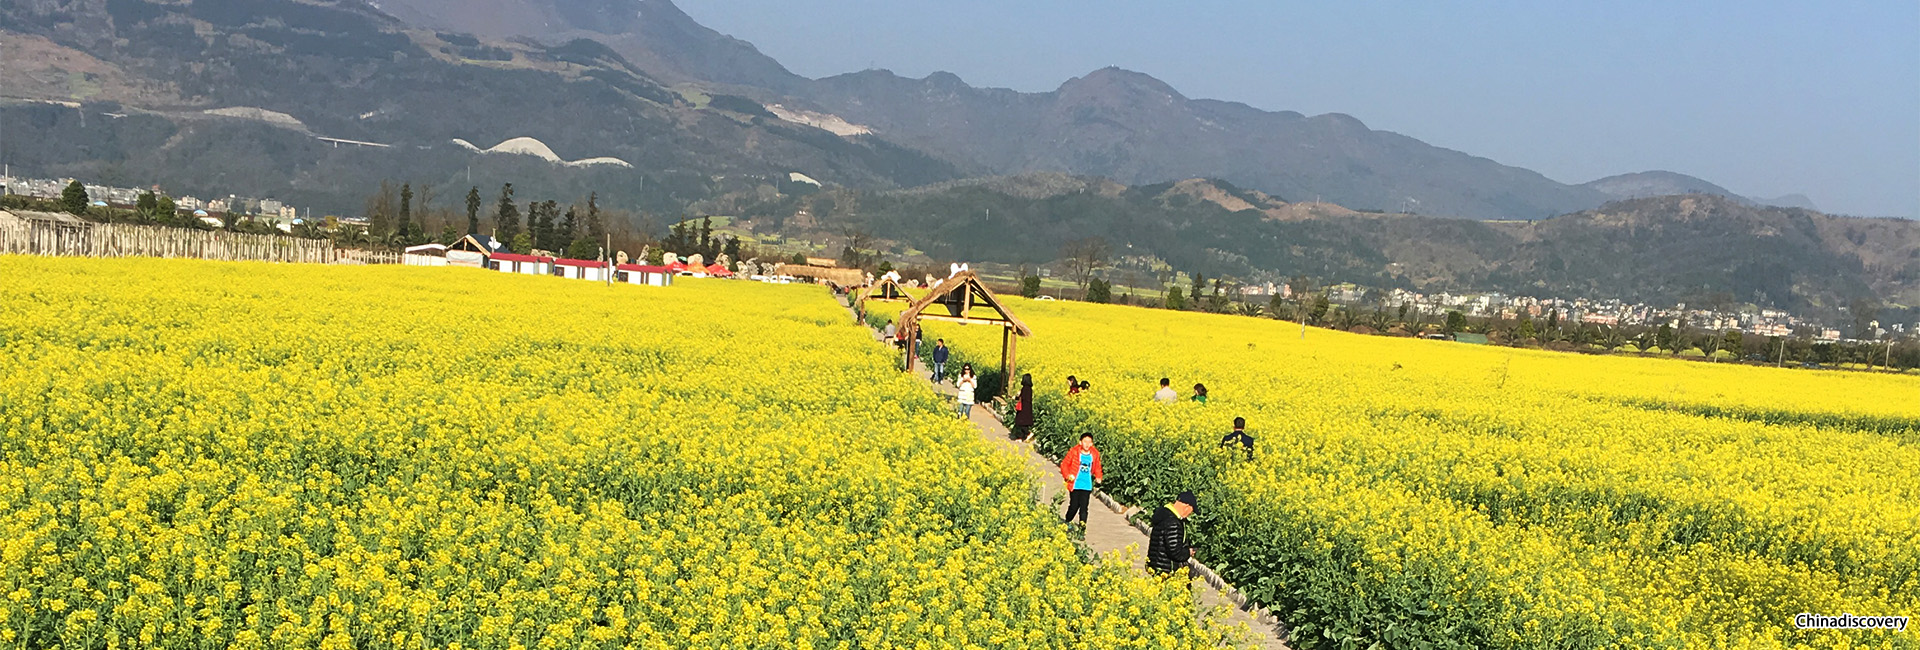 Luoping Yunnan Travel